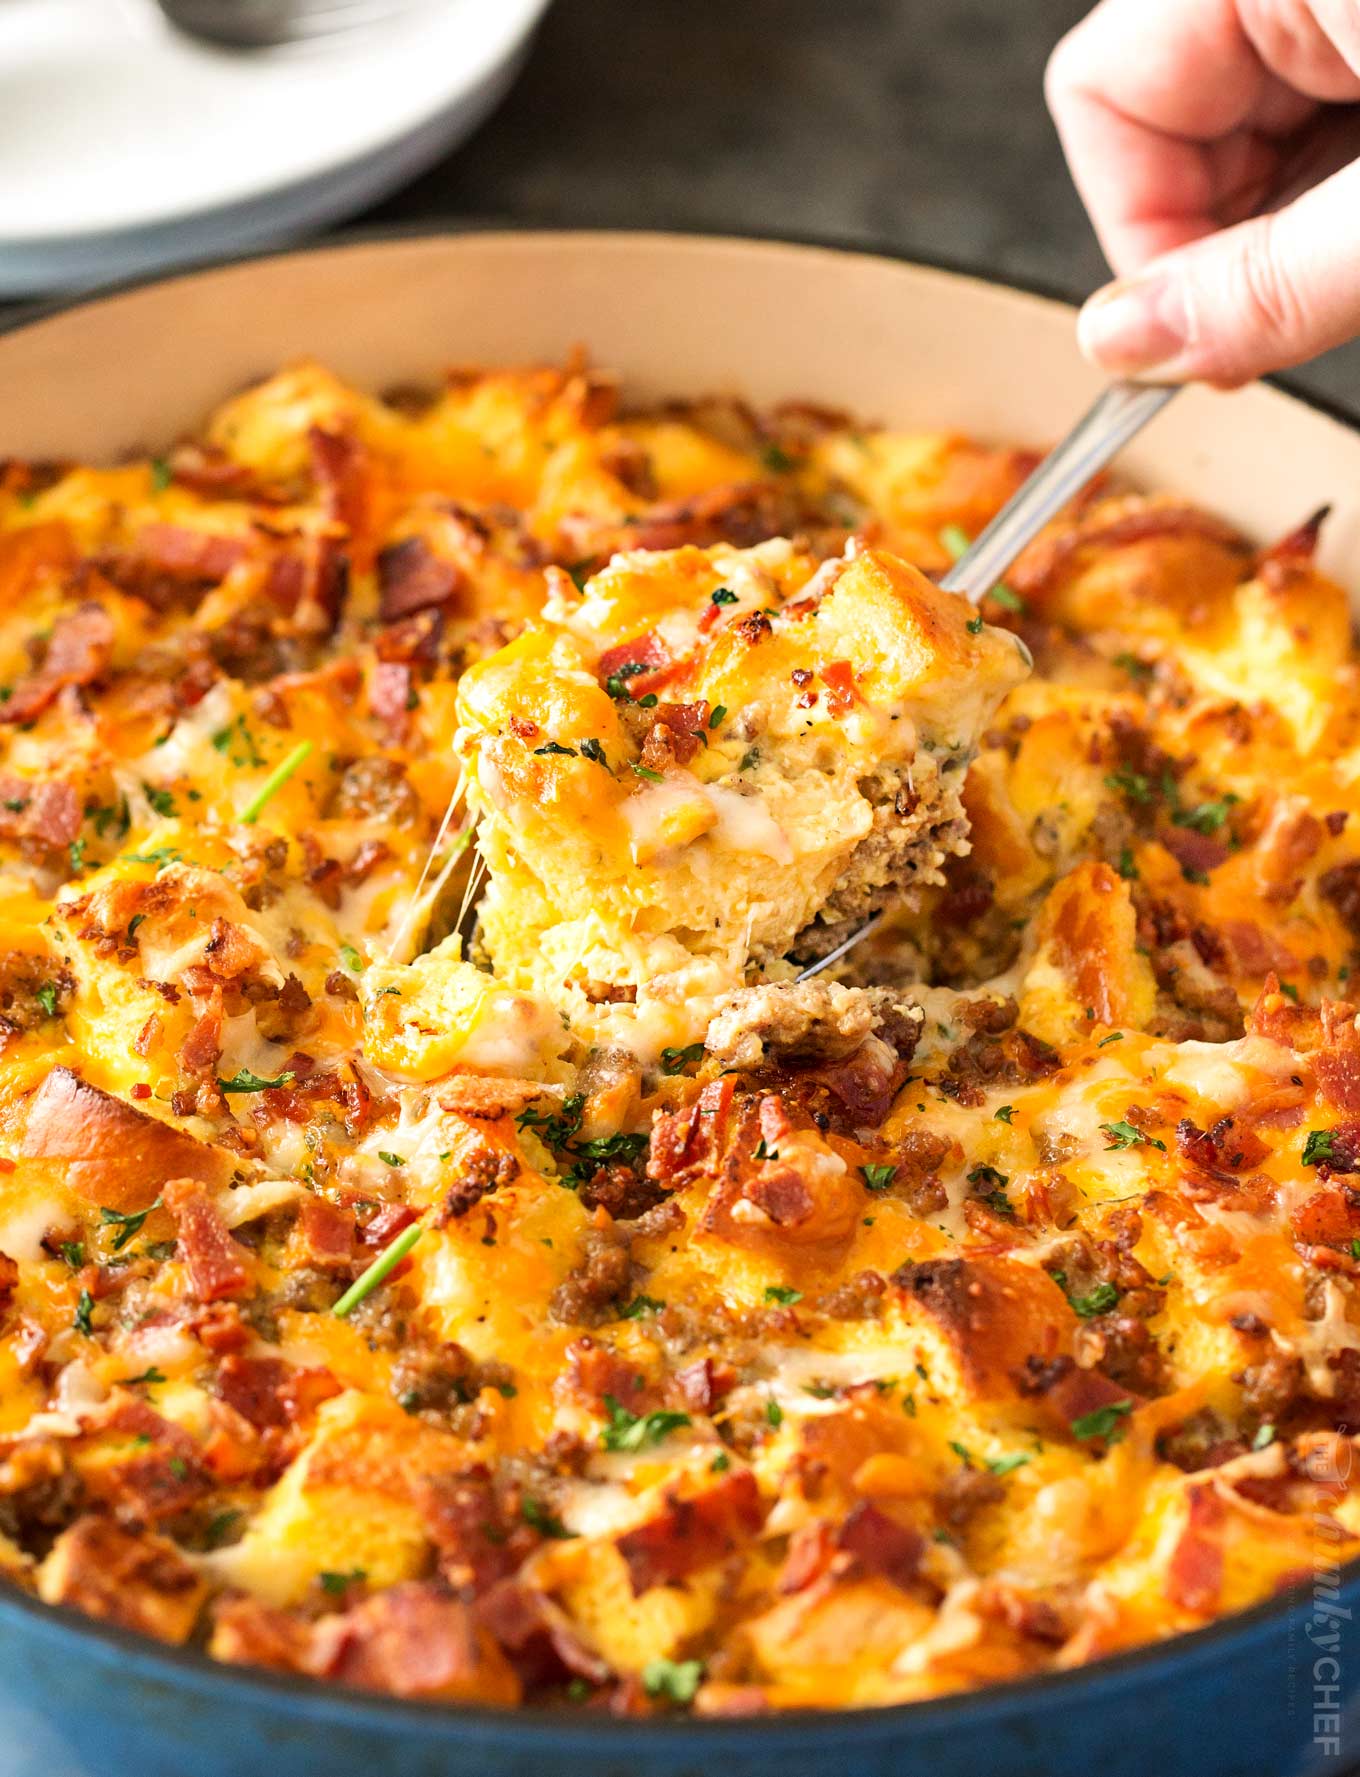 Loaded Overnight Breakfast Casserole - The Chunky Chef